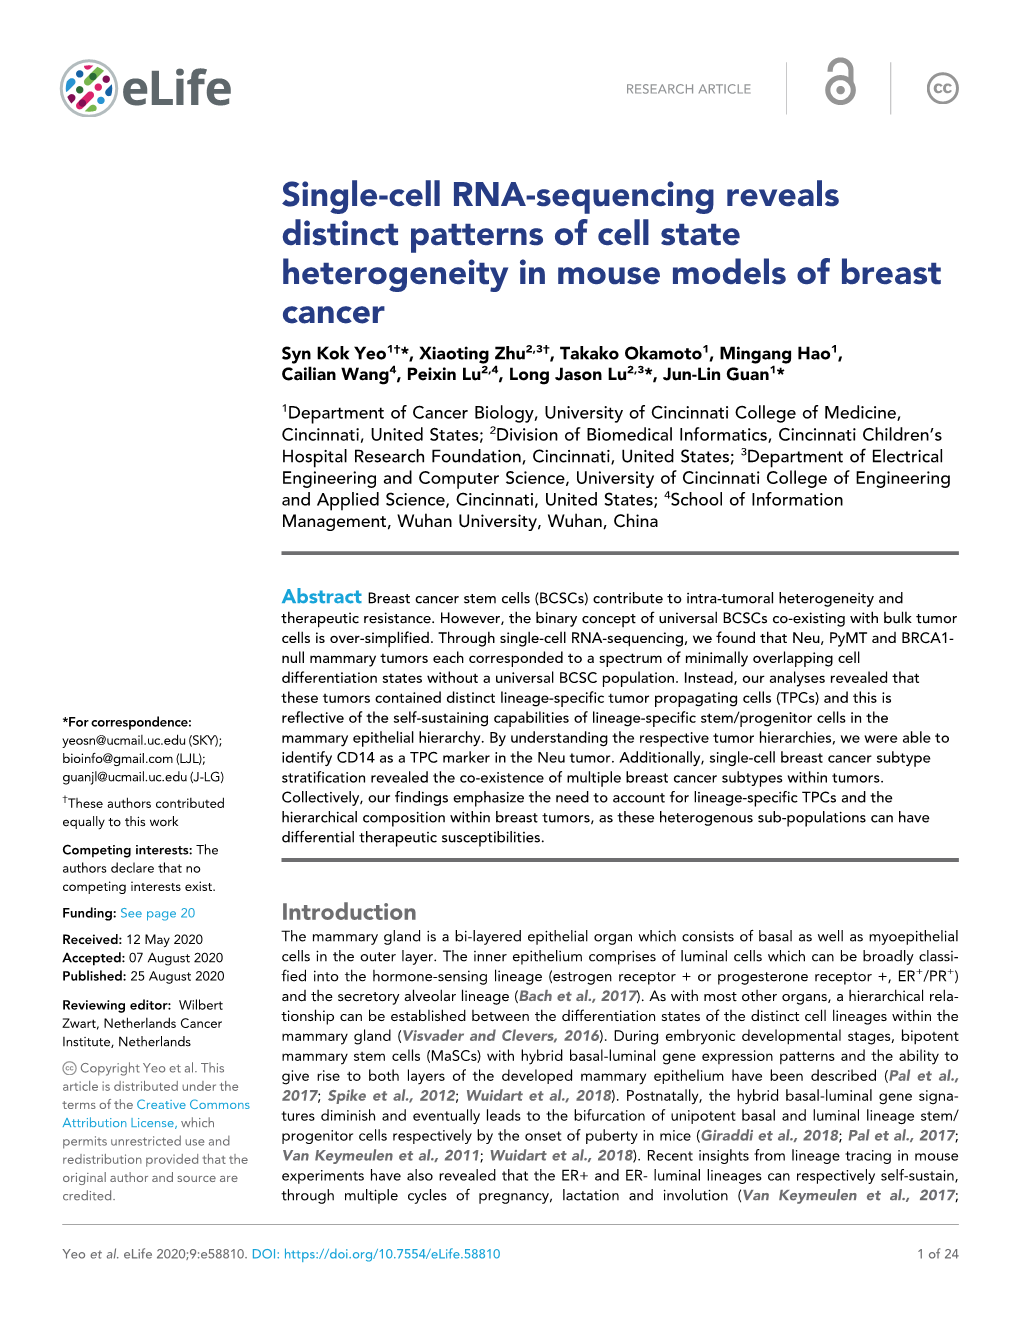 Single-Cell RNA-Sequencing Reveals Distinct Patterns of Cell State Heterogeneity in Mouse Models of Breast Cancer